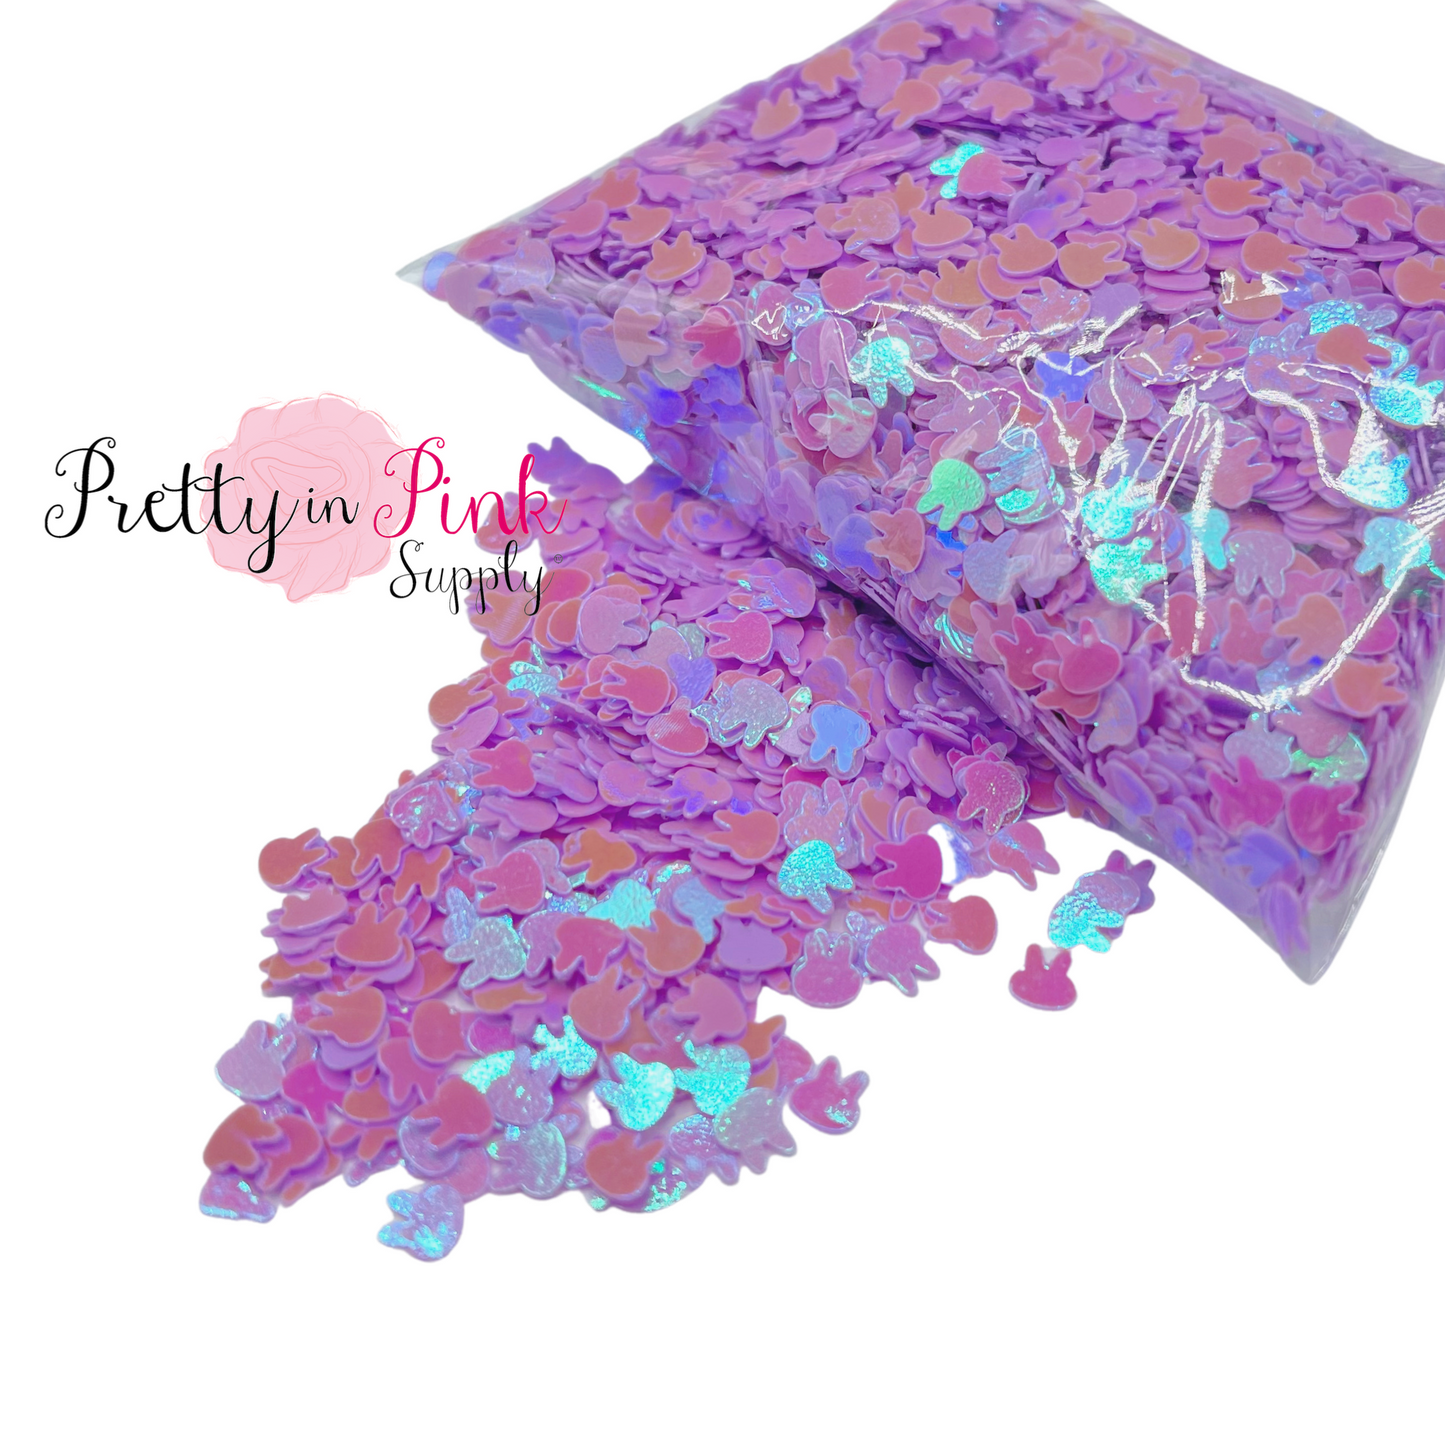 Iridescent Bunny | Loose Sequin Glitter - Pretty in Pink Supply